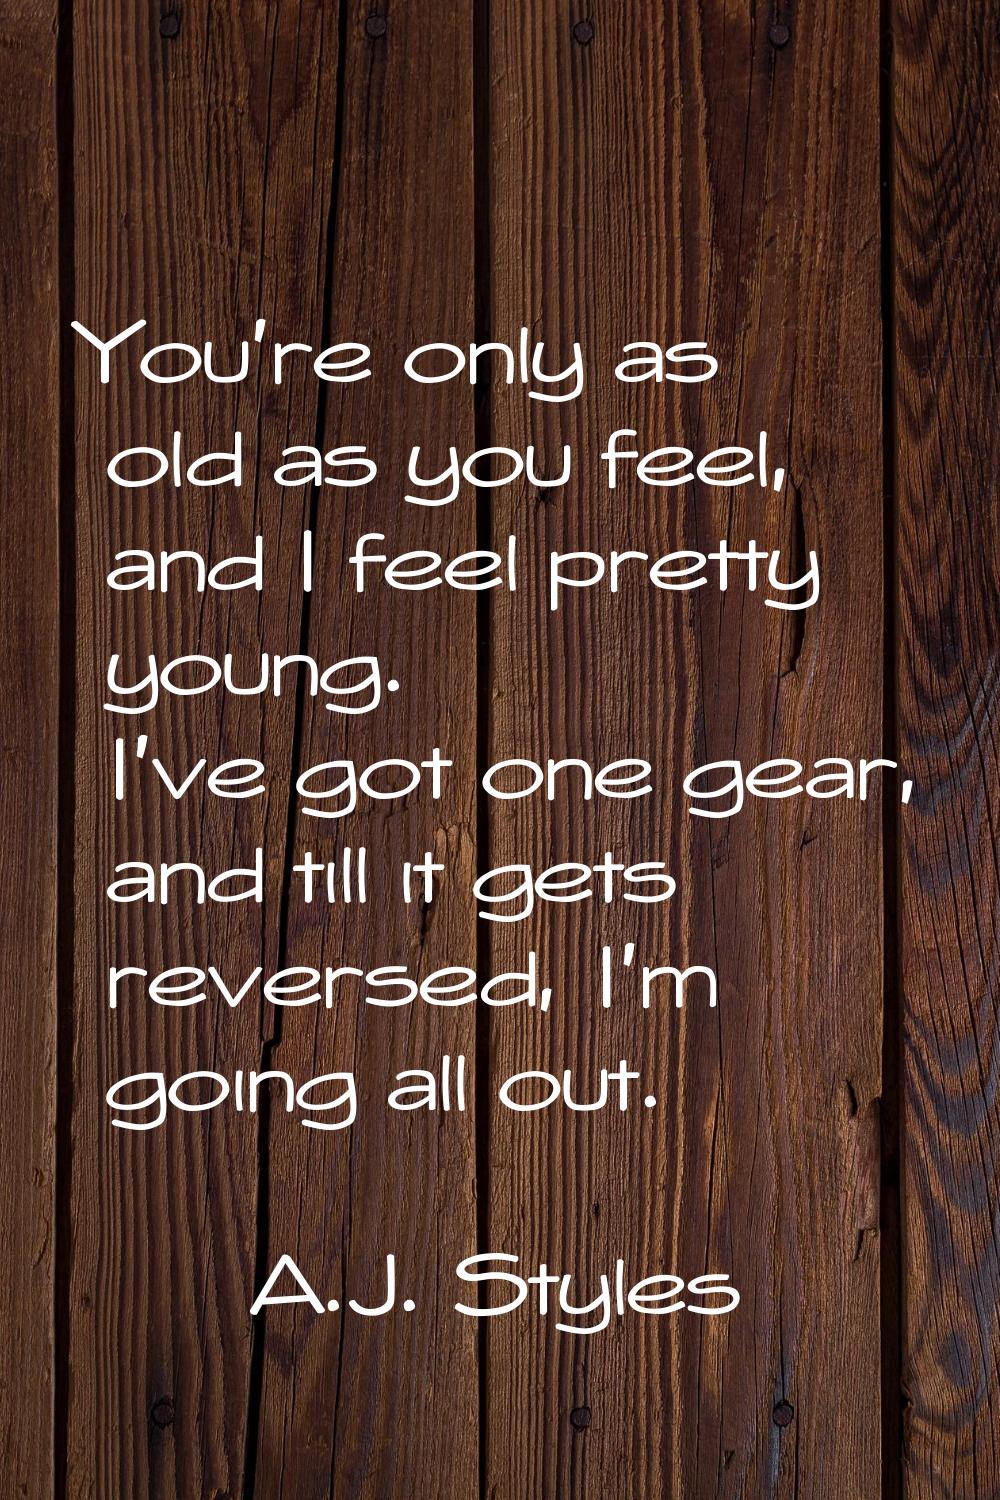 You're only as old as you feel, and I feel pretty young. I've got one gear, and till it gets revers